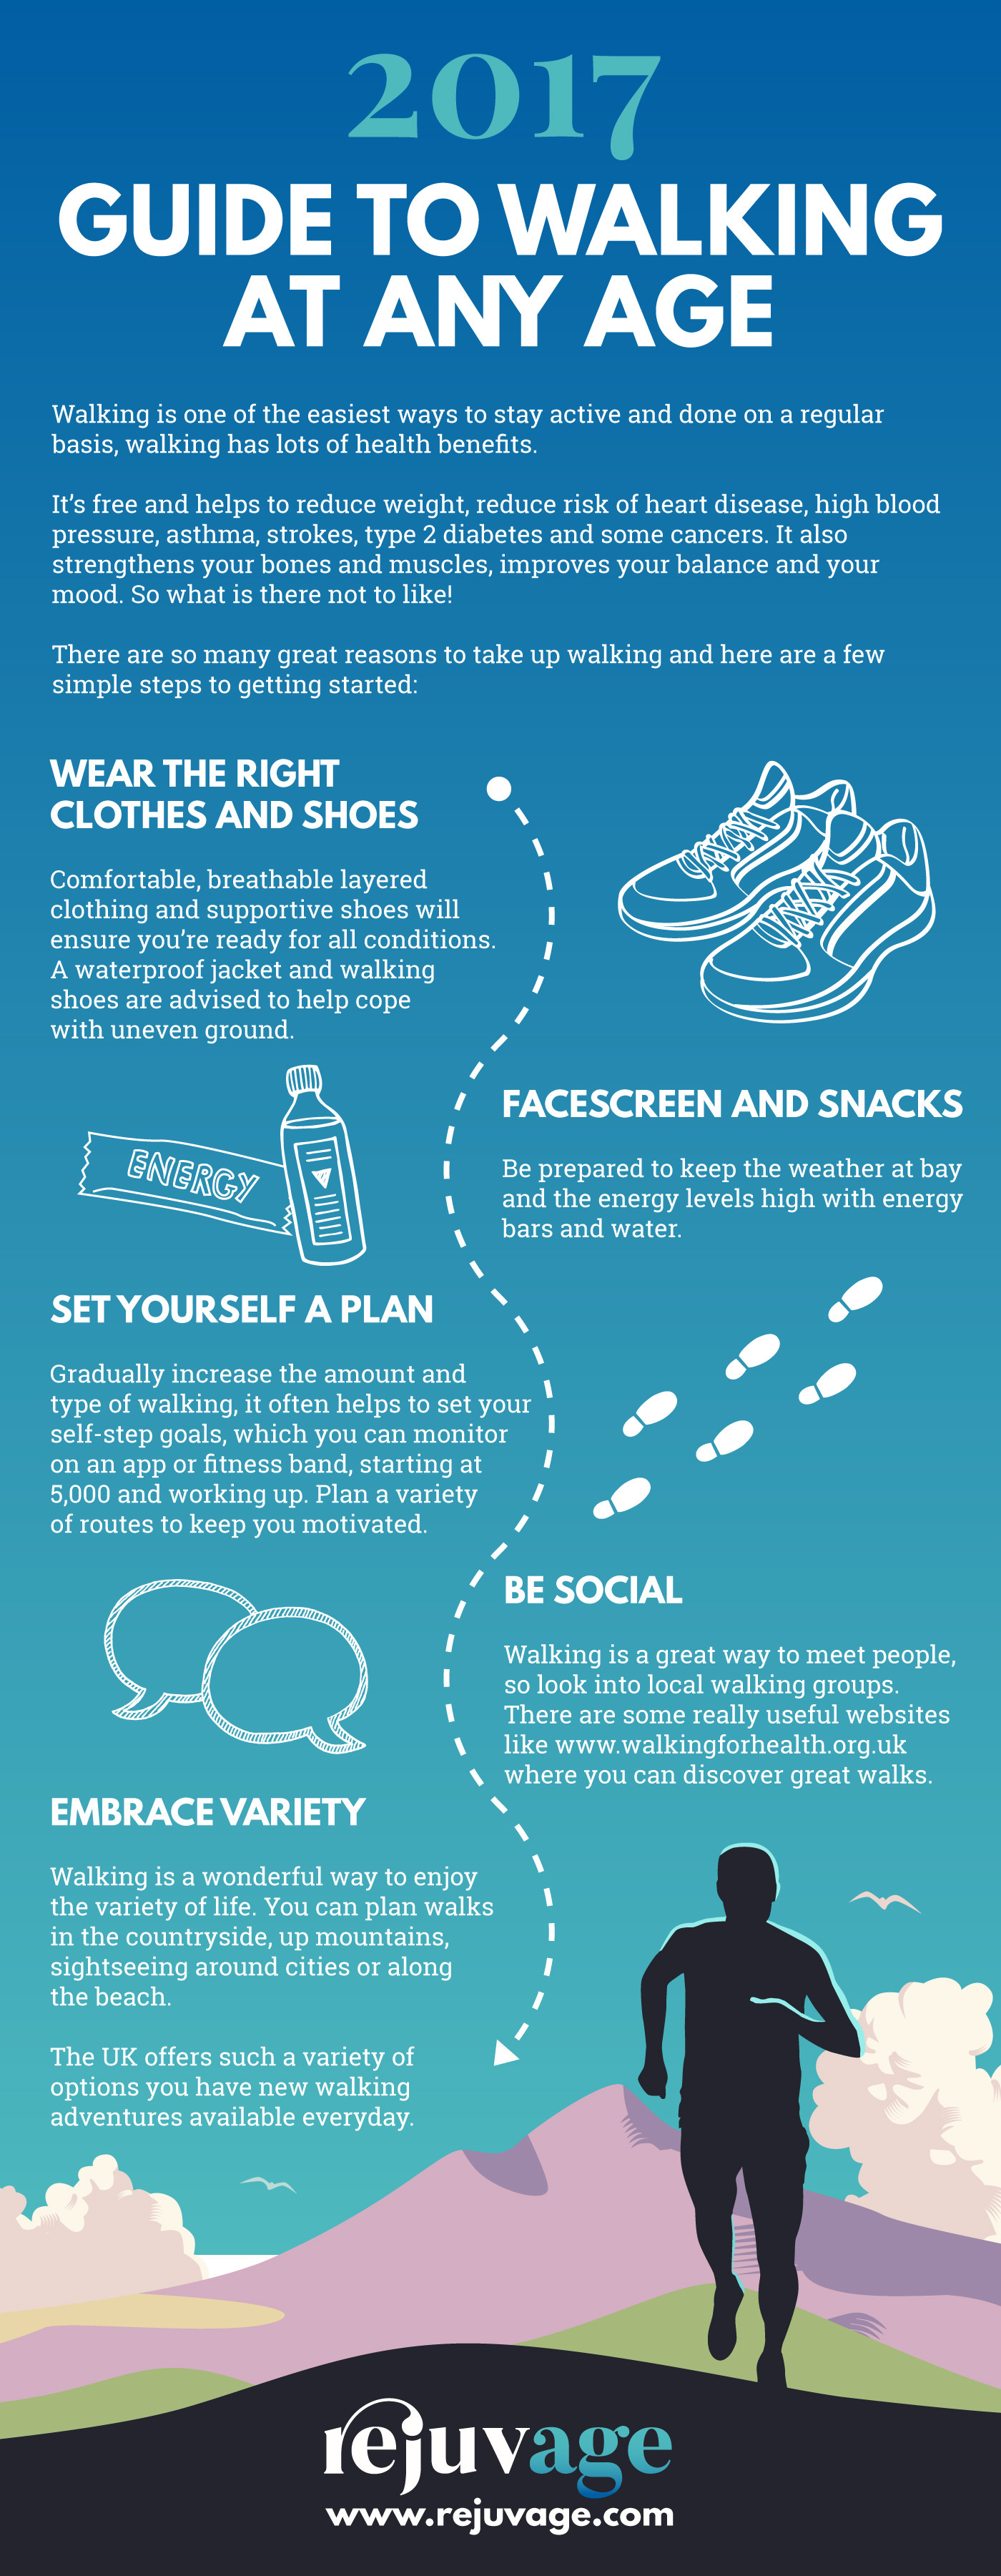 image of the Rejuvage 2017 guide to walking infographic